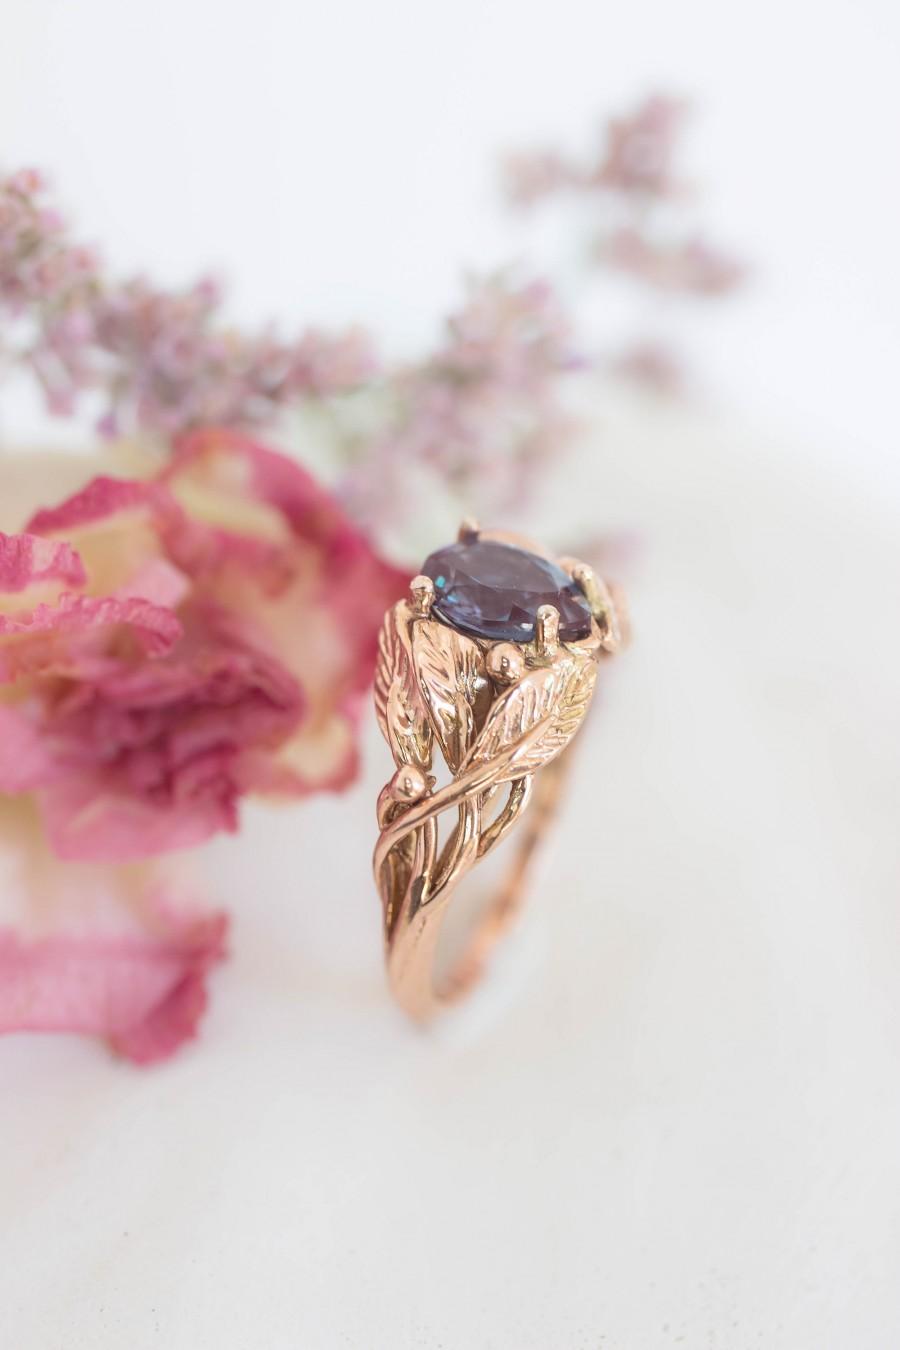 Mariage - Pear cut alexandrite engagement ring, wedding ring for woman, leaves ring, nature jewelry, leaf ring, teardrop ring, colour change, 14K gold